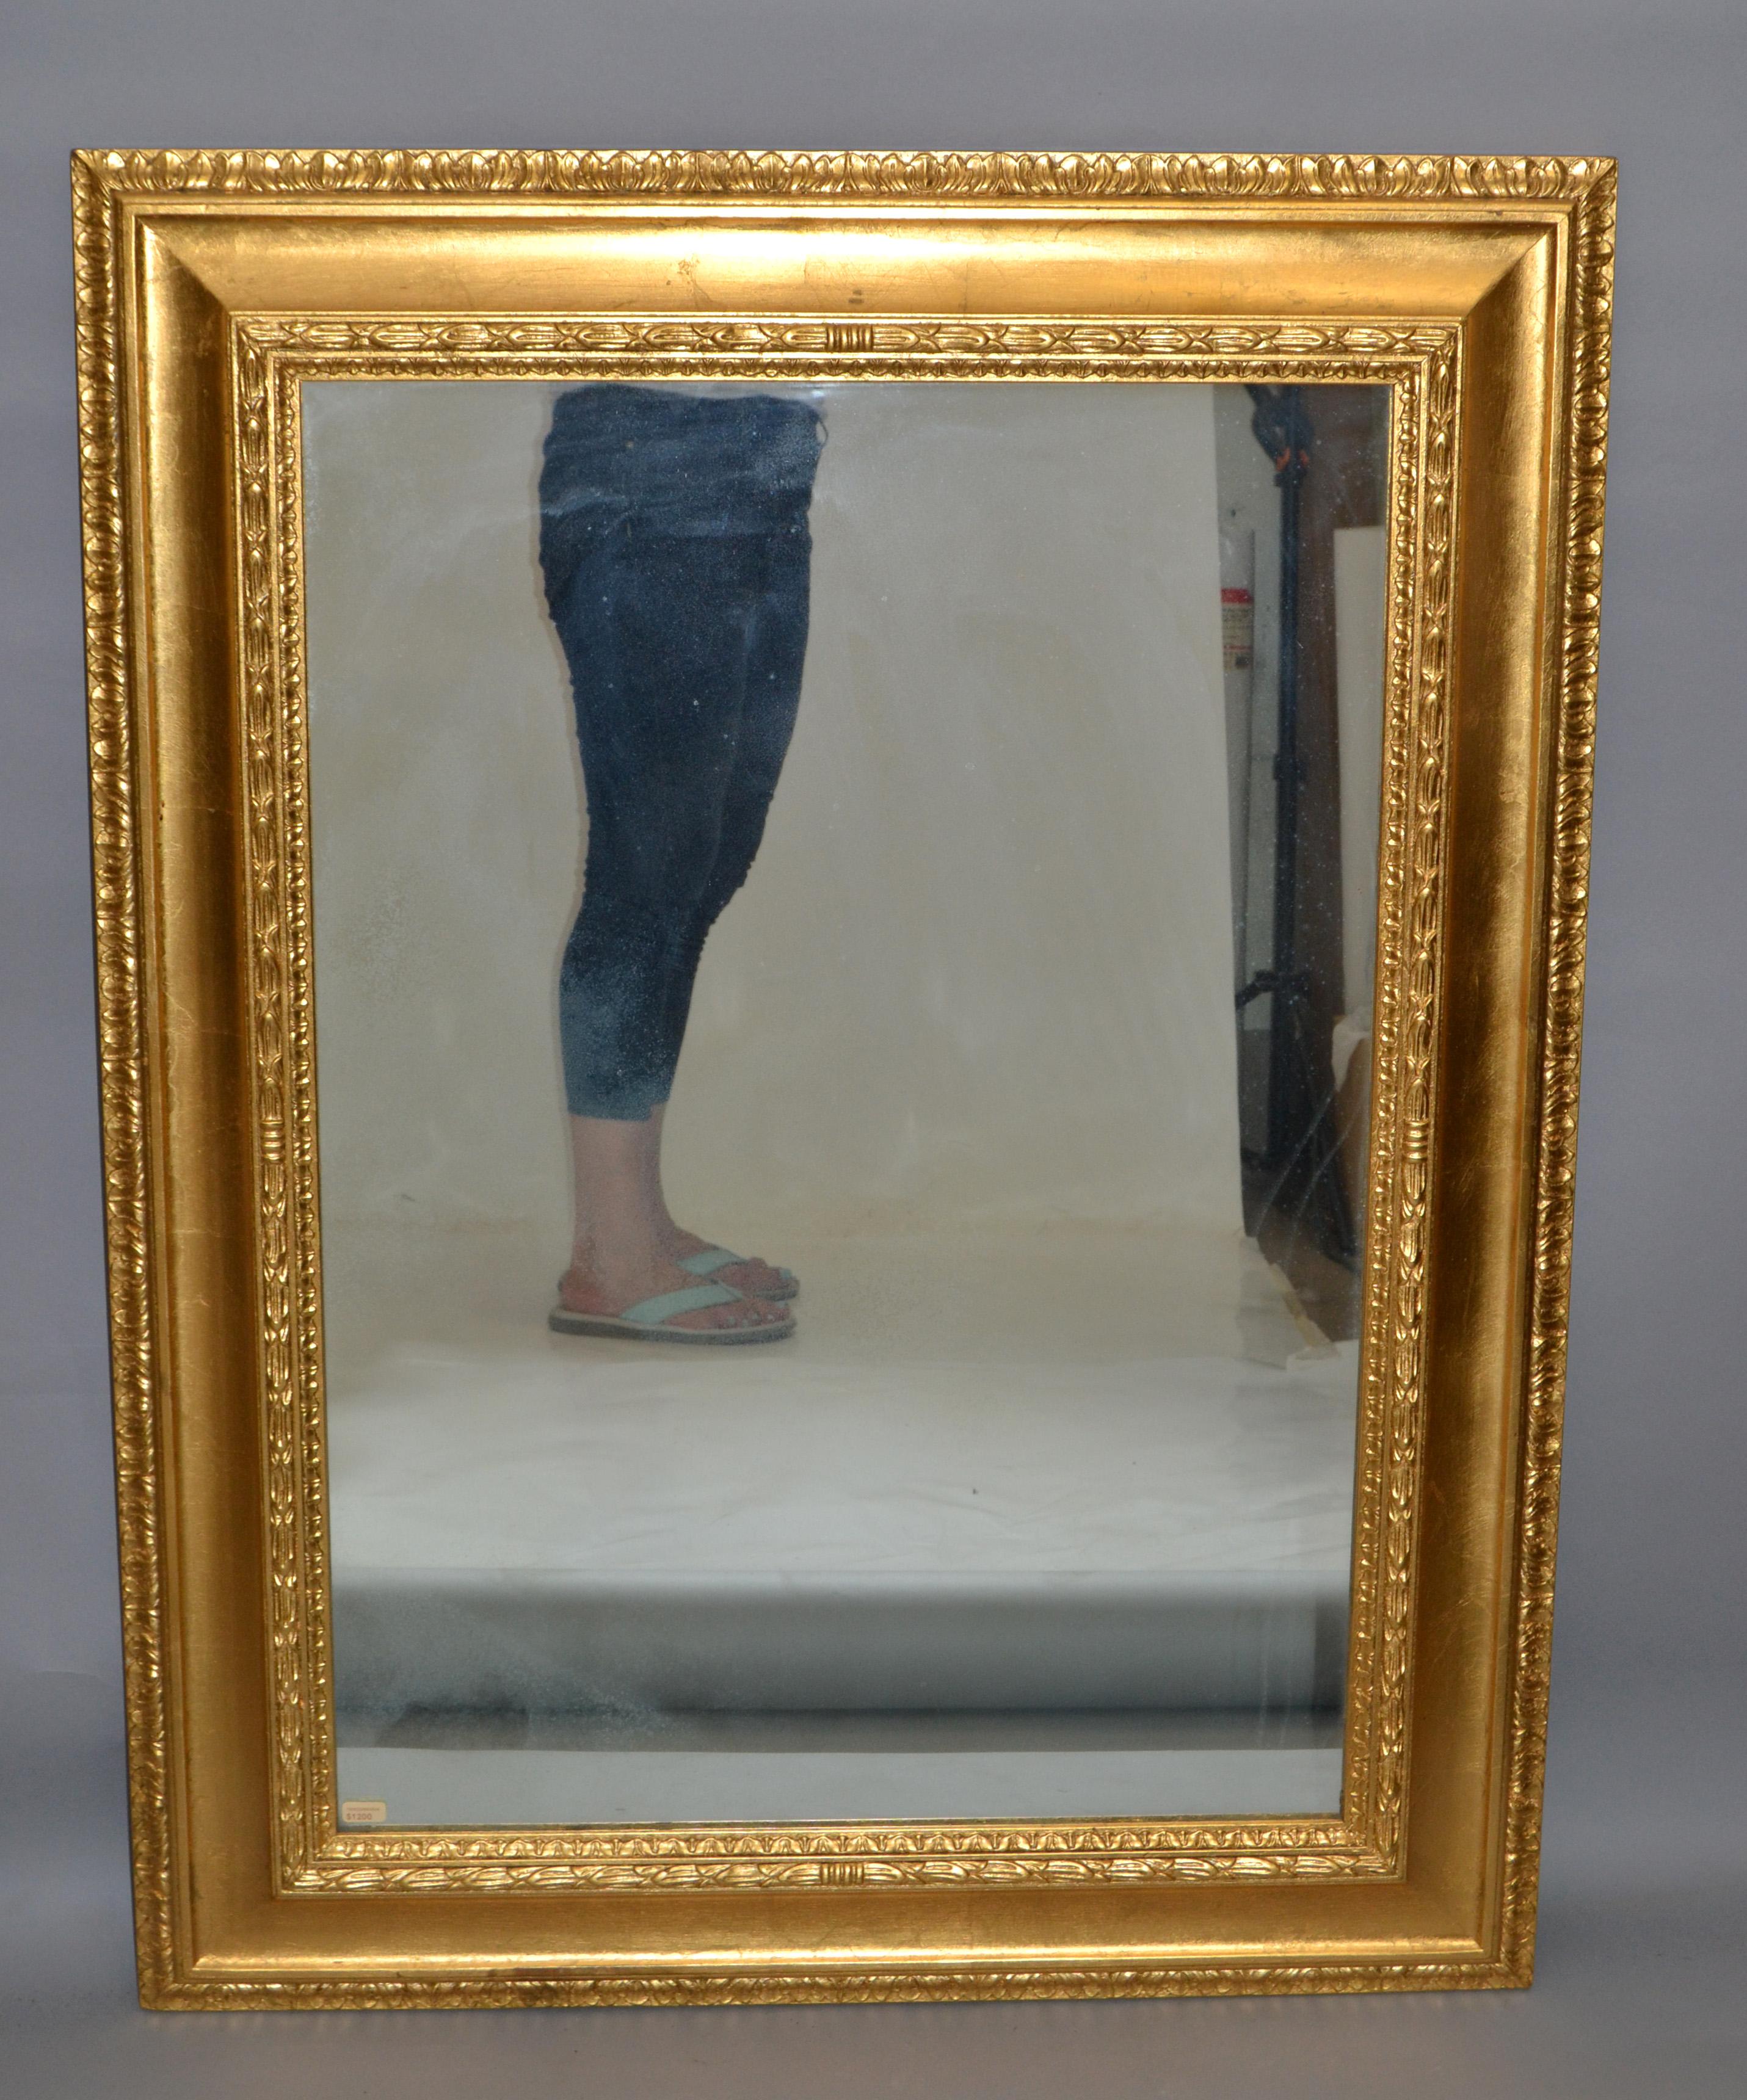 Giltwood Italian Neoclassical Regency Rectangle Gilded Wall Mirror, 1930s For Sale